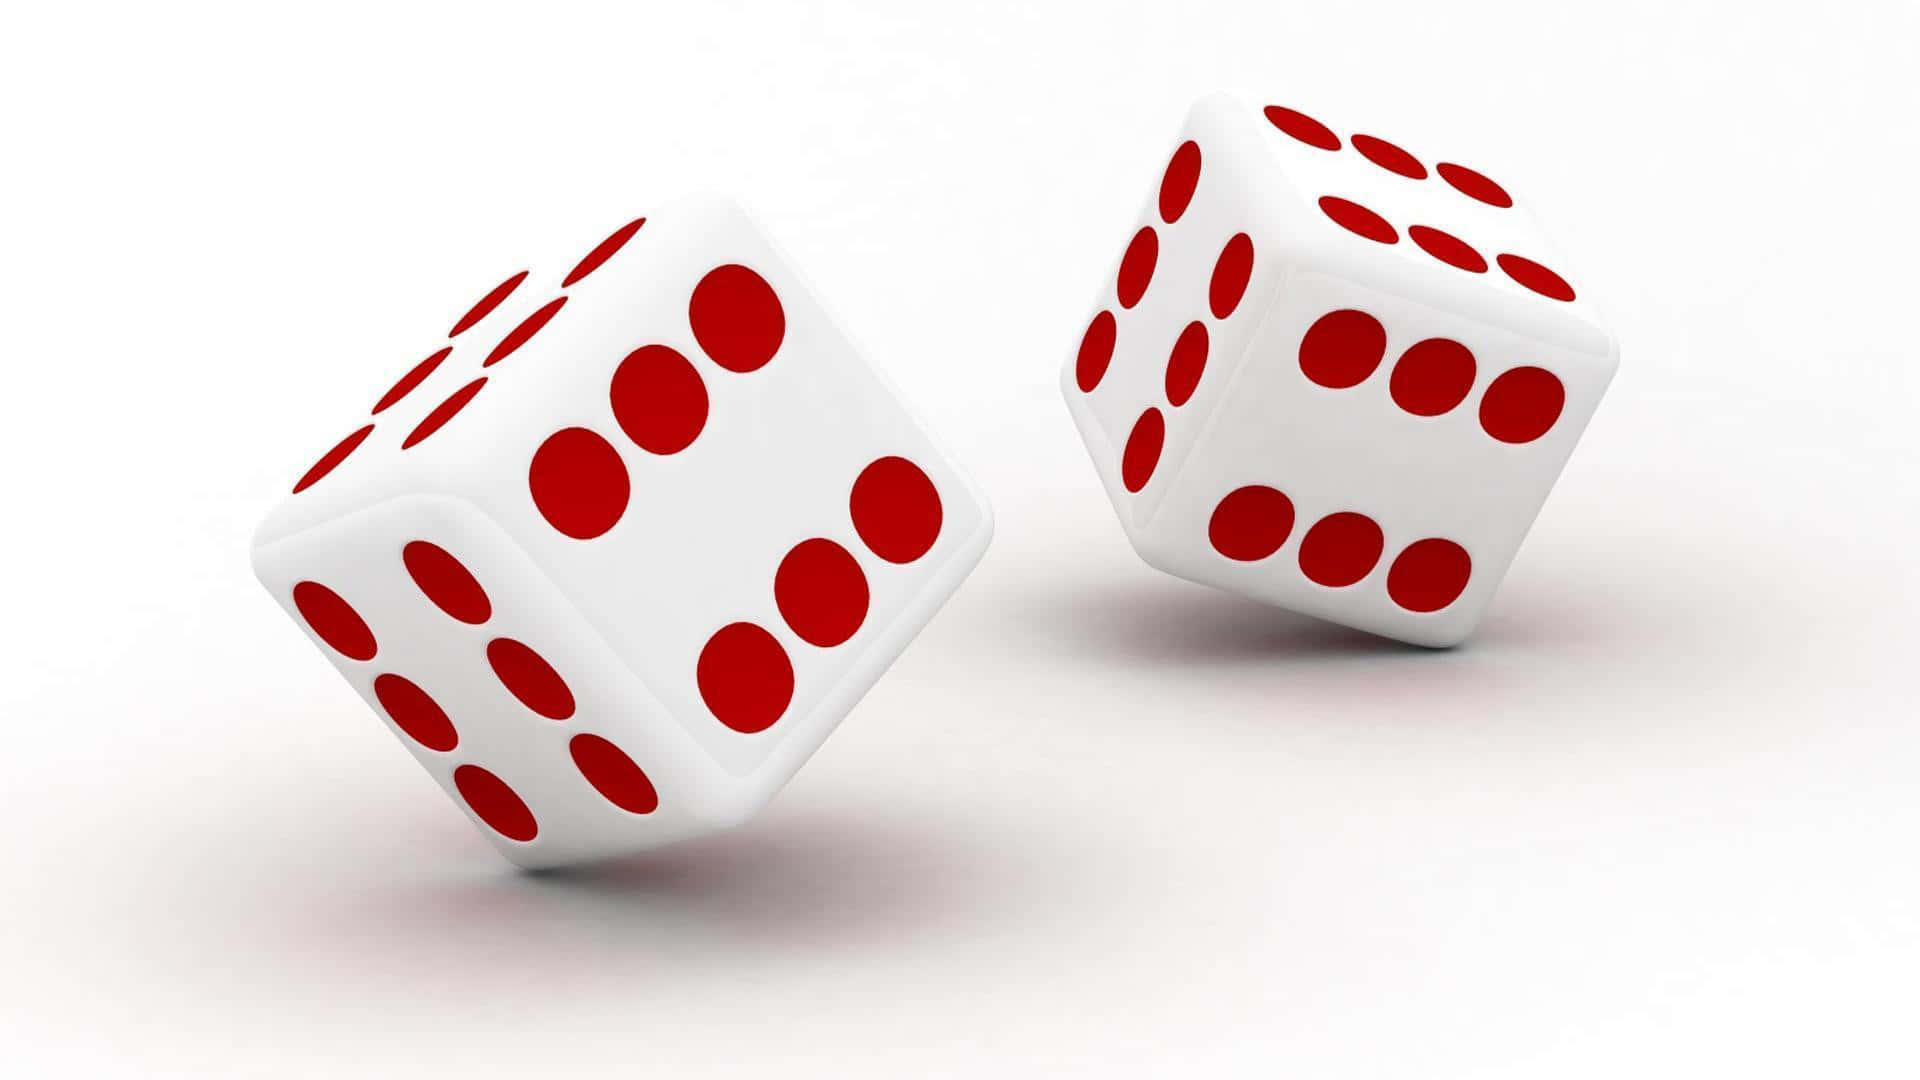 Two Red Dice Tossed White Background Wallpaper